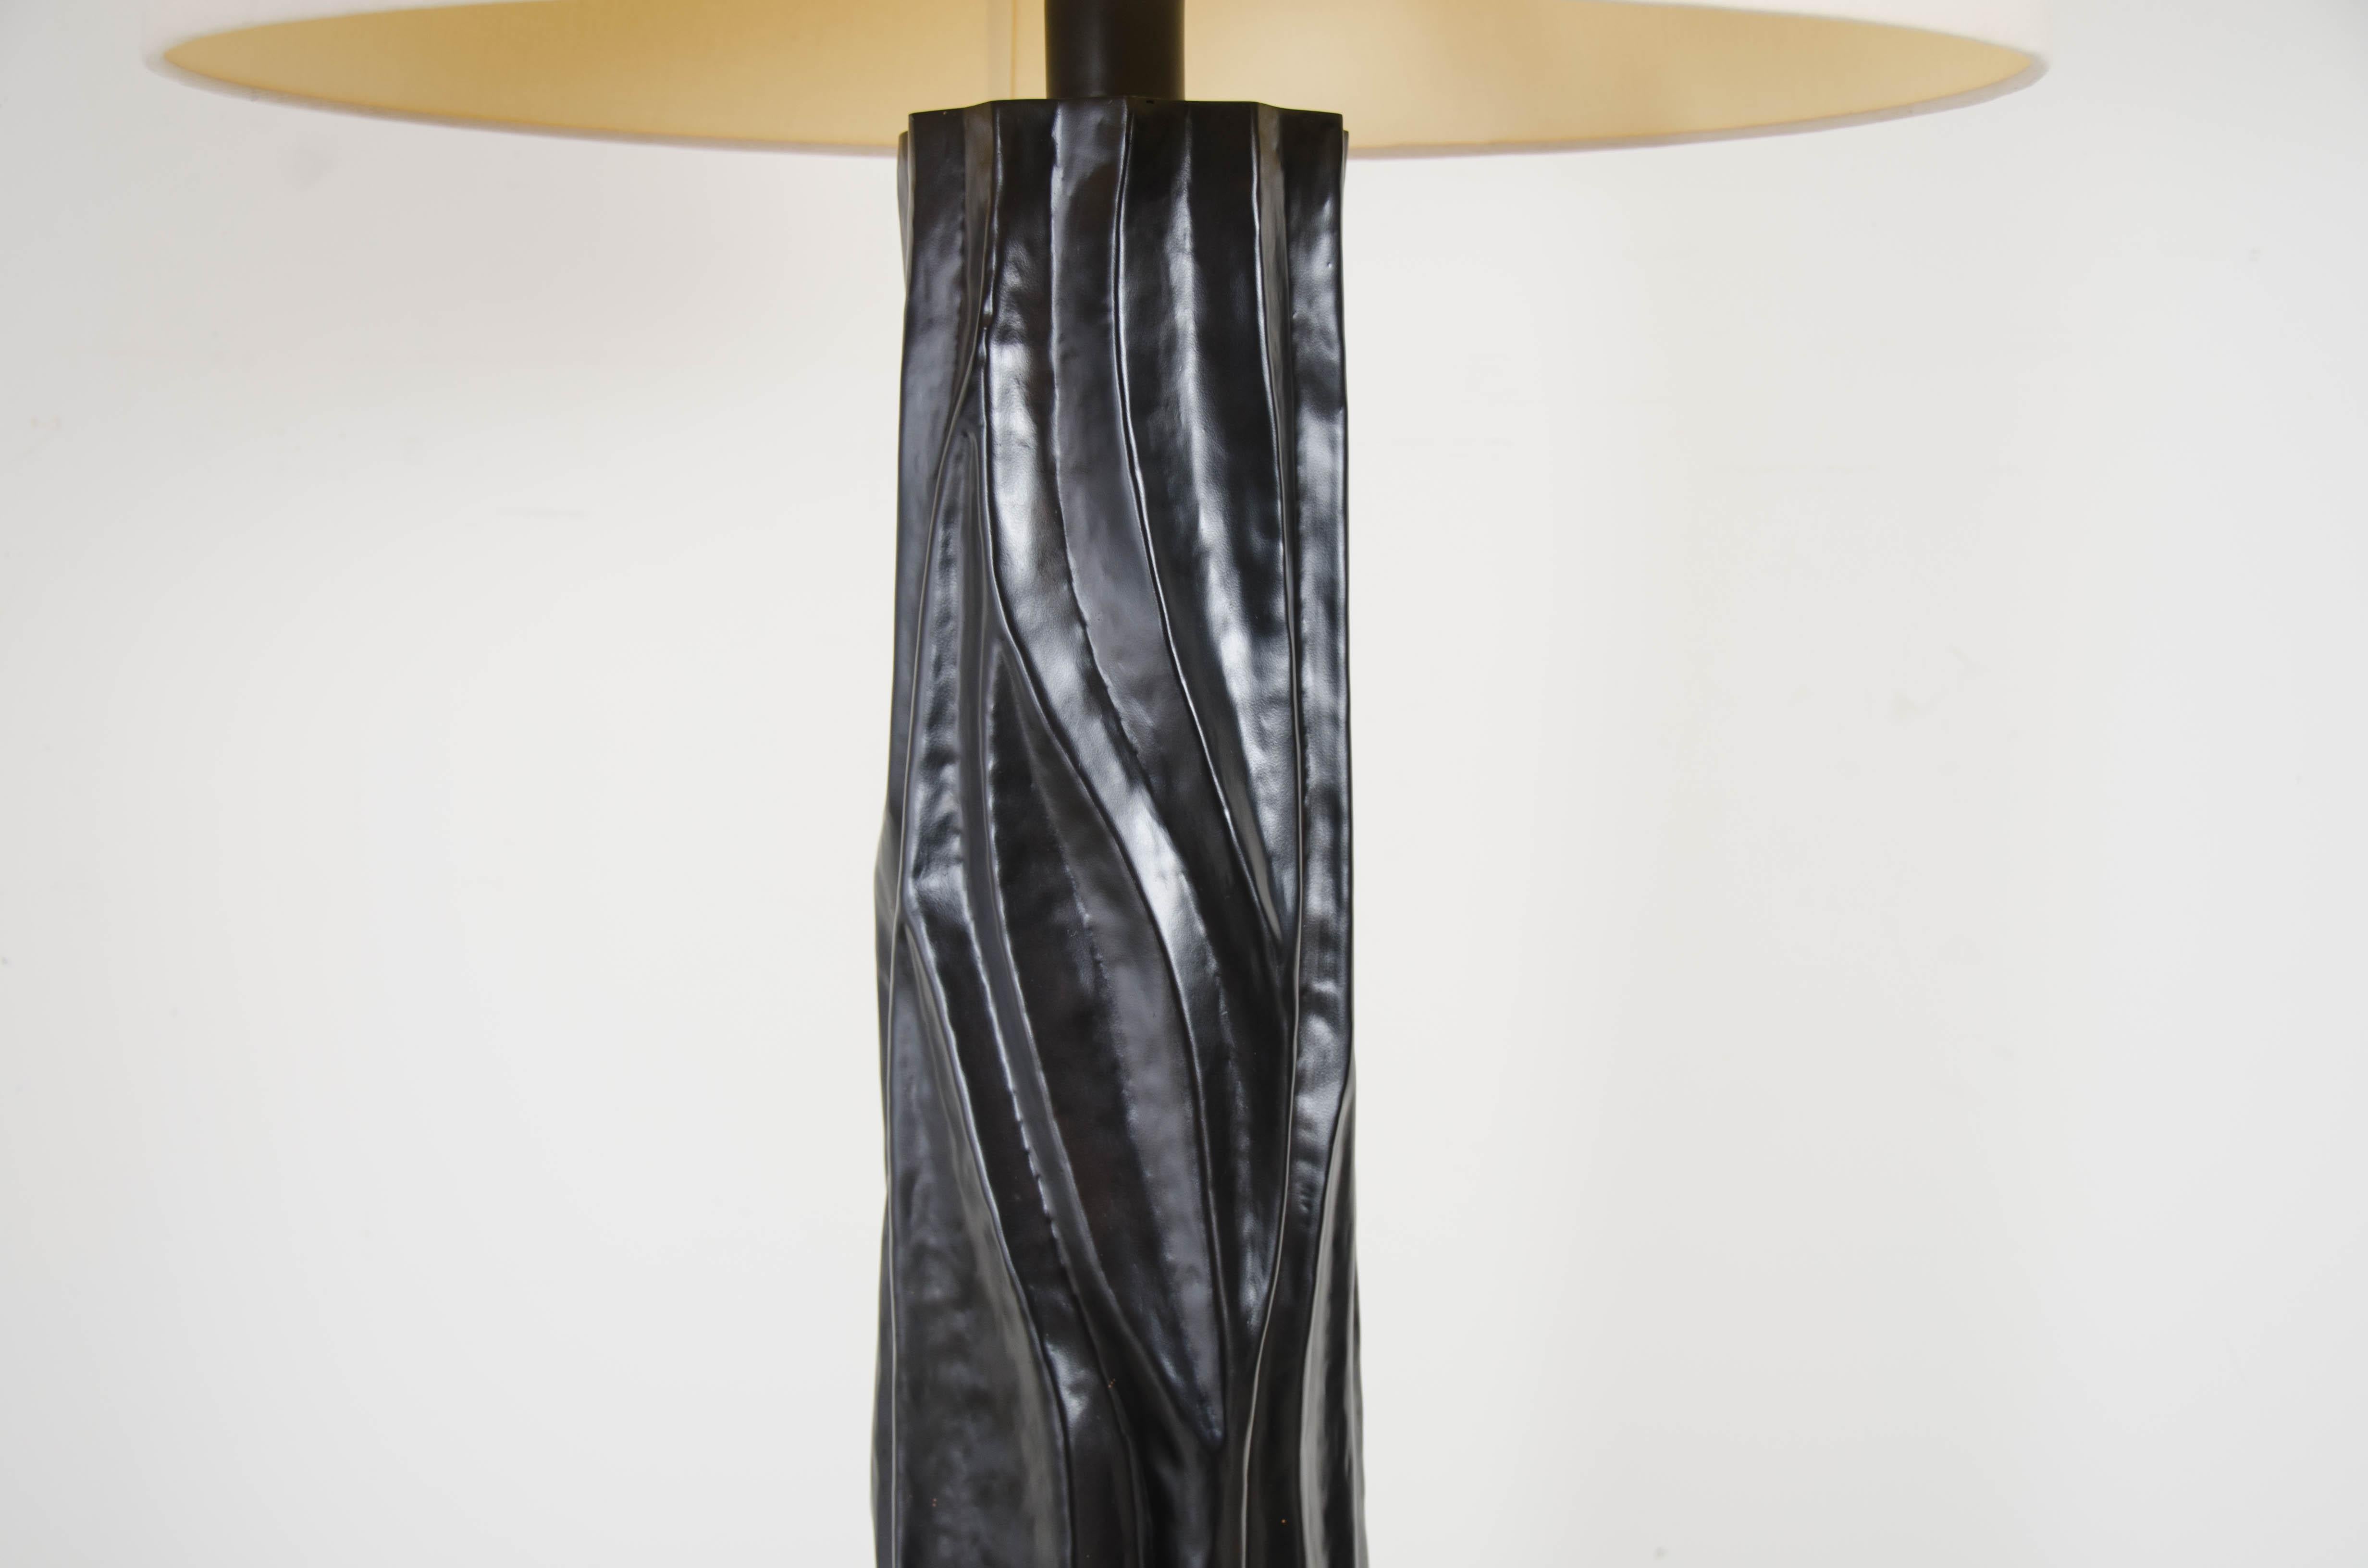 Repoussé Tree Trunk Floor Lamp, Black Copper by Robert Kuo, Hand Repousse, Limited